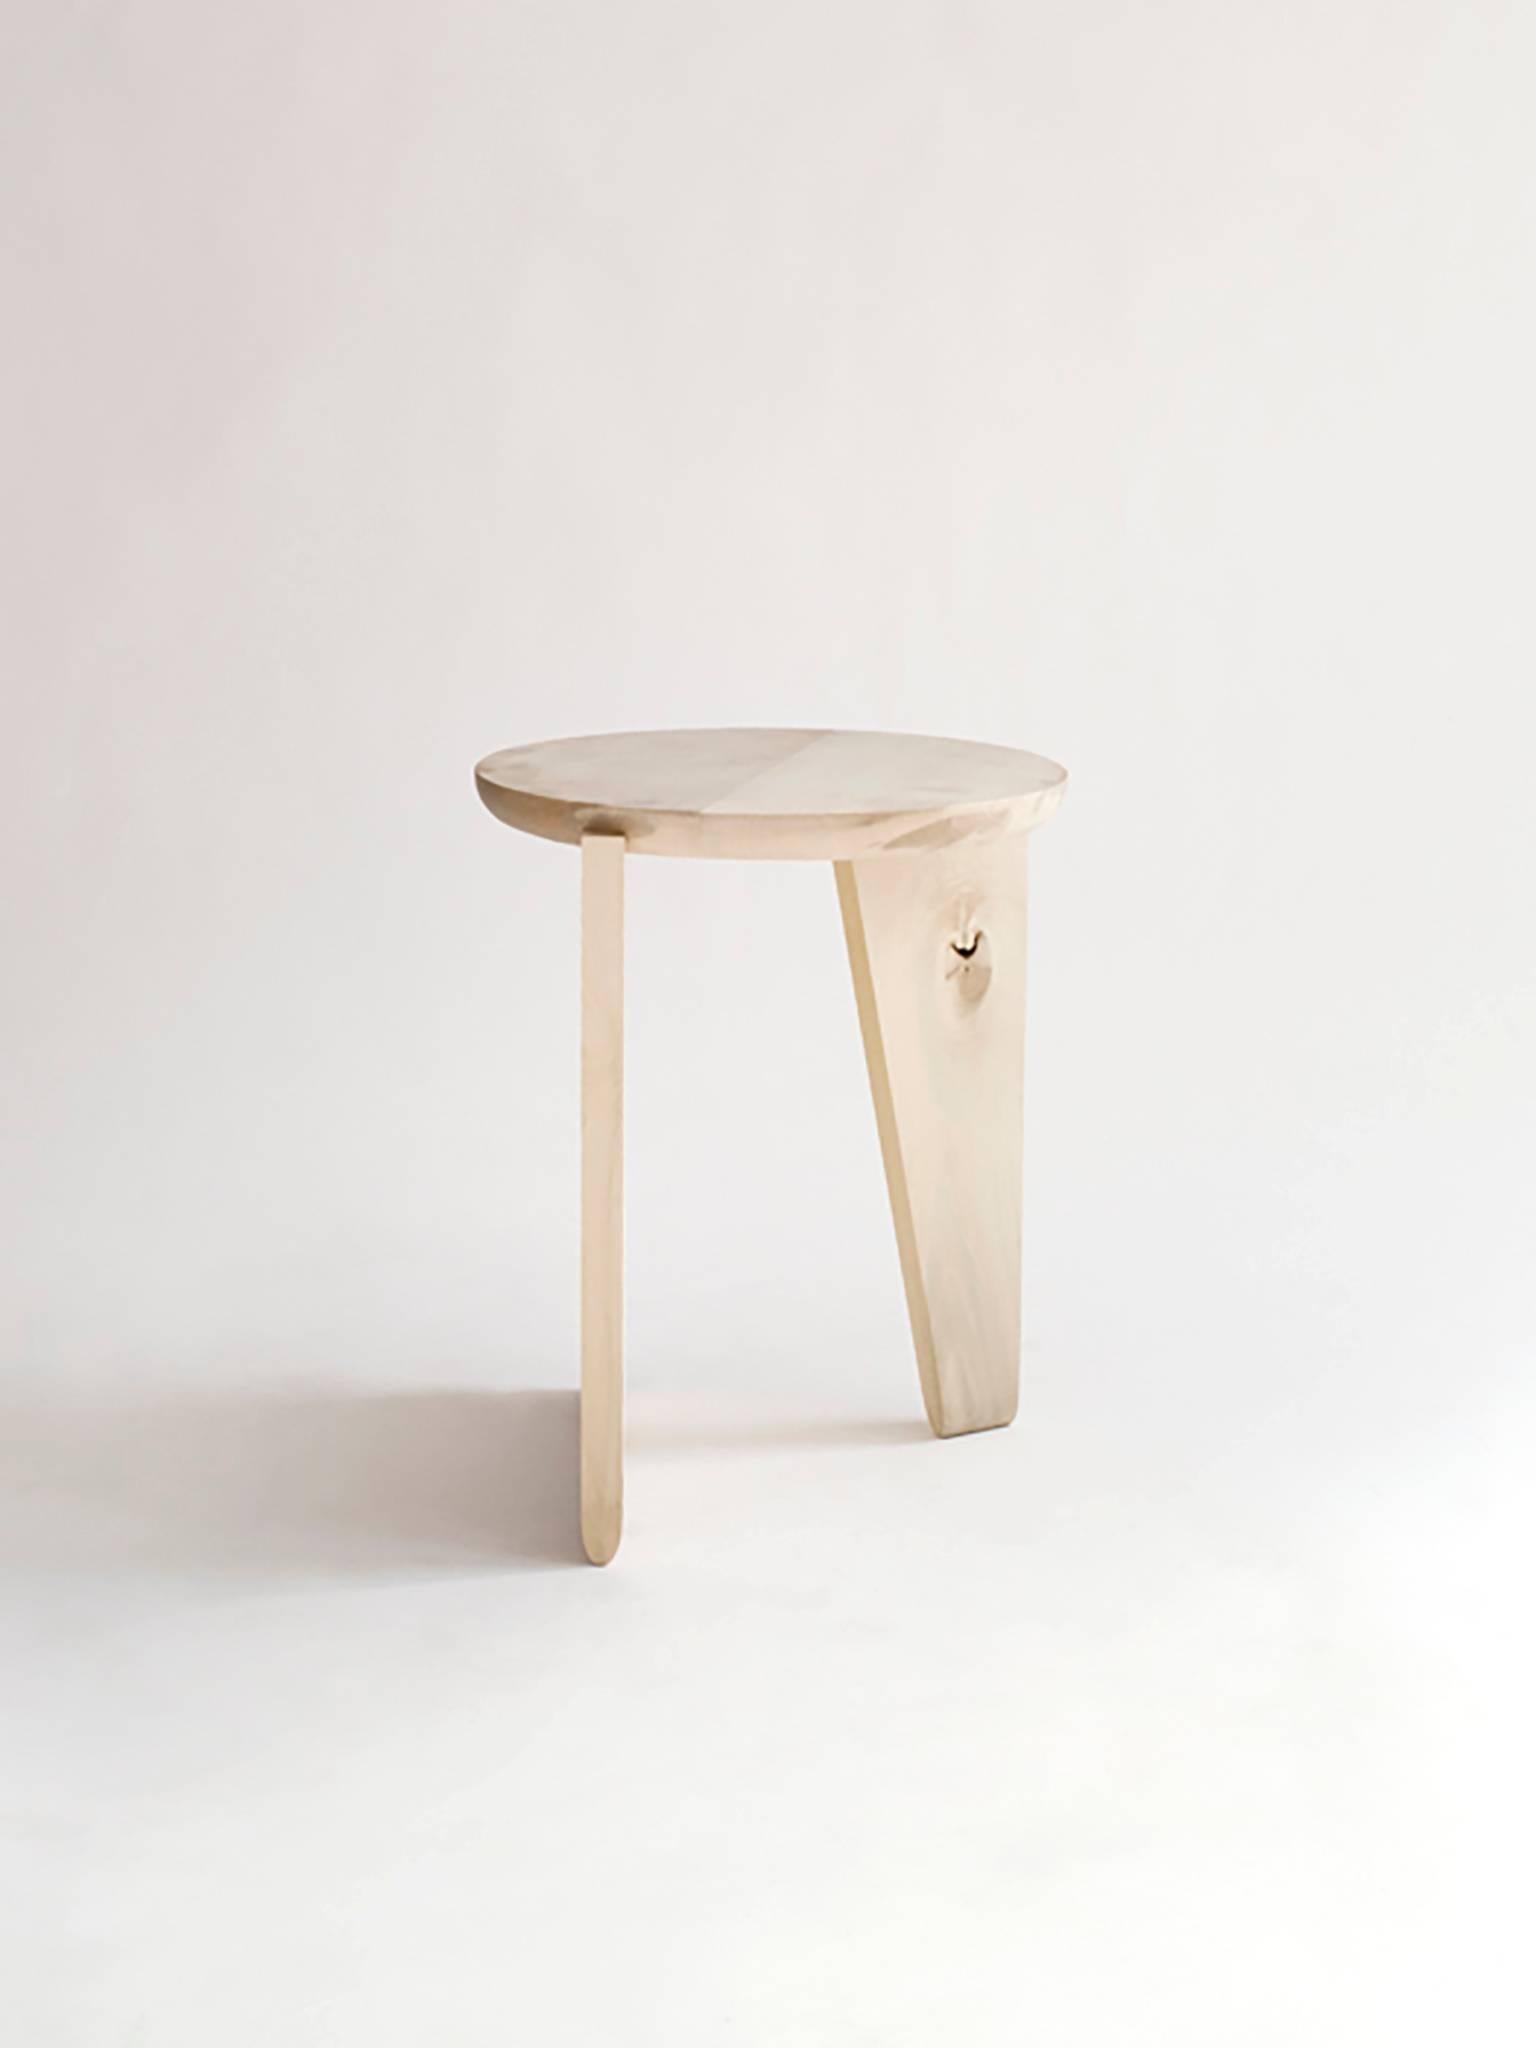 The Wu Stool is a made-to-order contemporary piece handcrafted in our Brooklyn studio. It can be used as a stool or side table, and is constructed of solid wood. 
